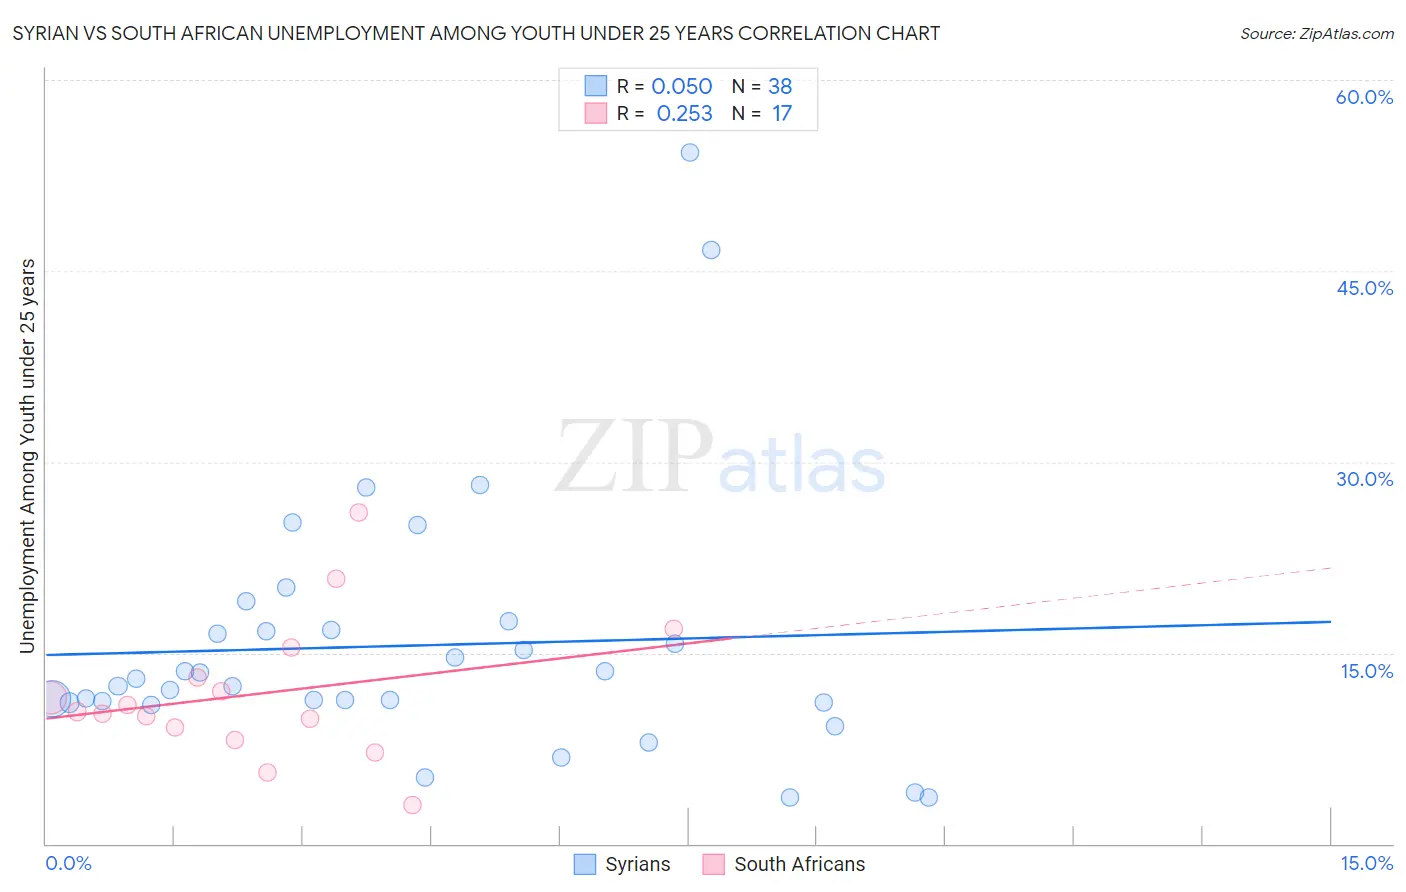 Syrian vs South African Unemployment Among Youth under 25 years